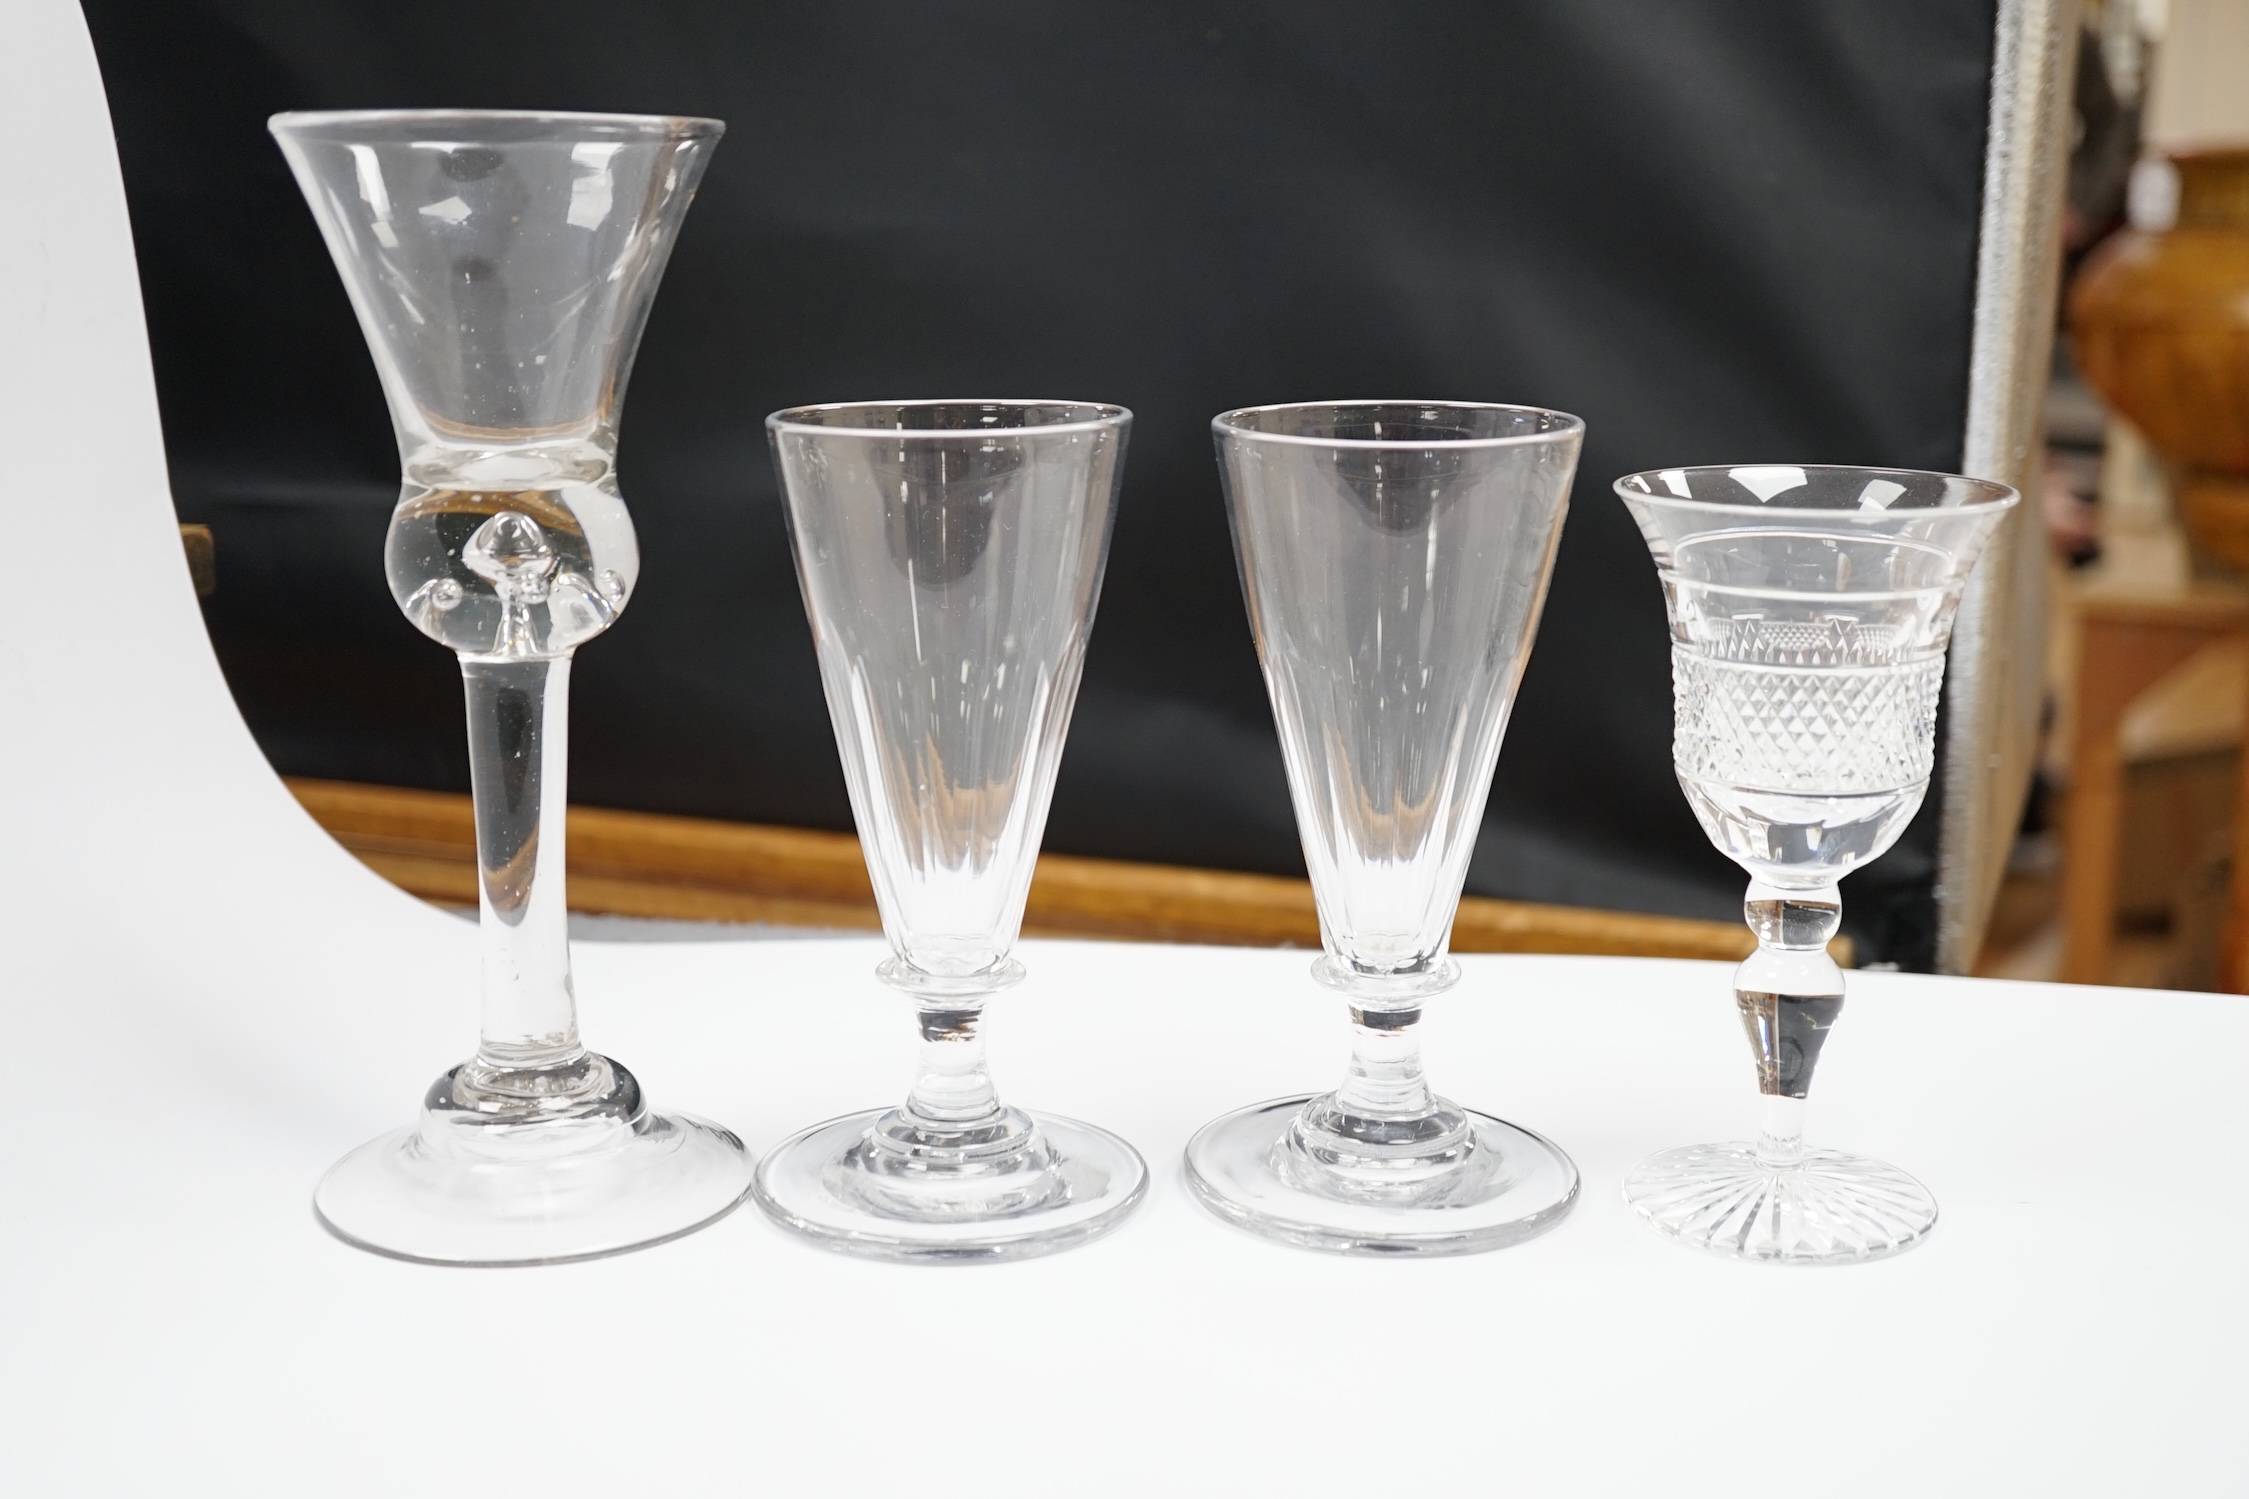 A pair of early 19th century dwarf ale glasses with fluted conical bowls, bladed knop stems and polished pontils, together with a mid-18th century thistle bowl glass with multiple air tears, plain stem and domed foot and